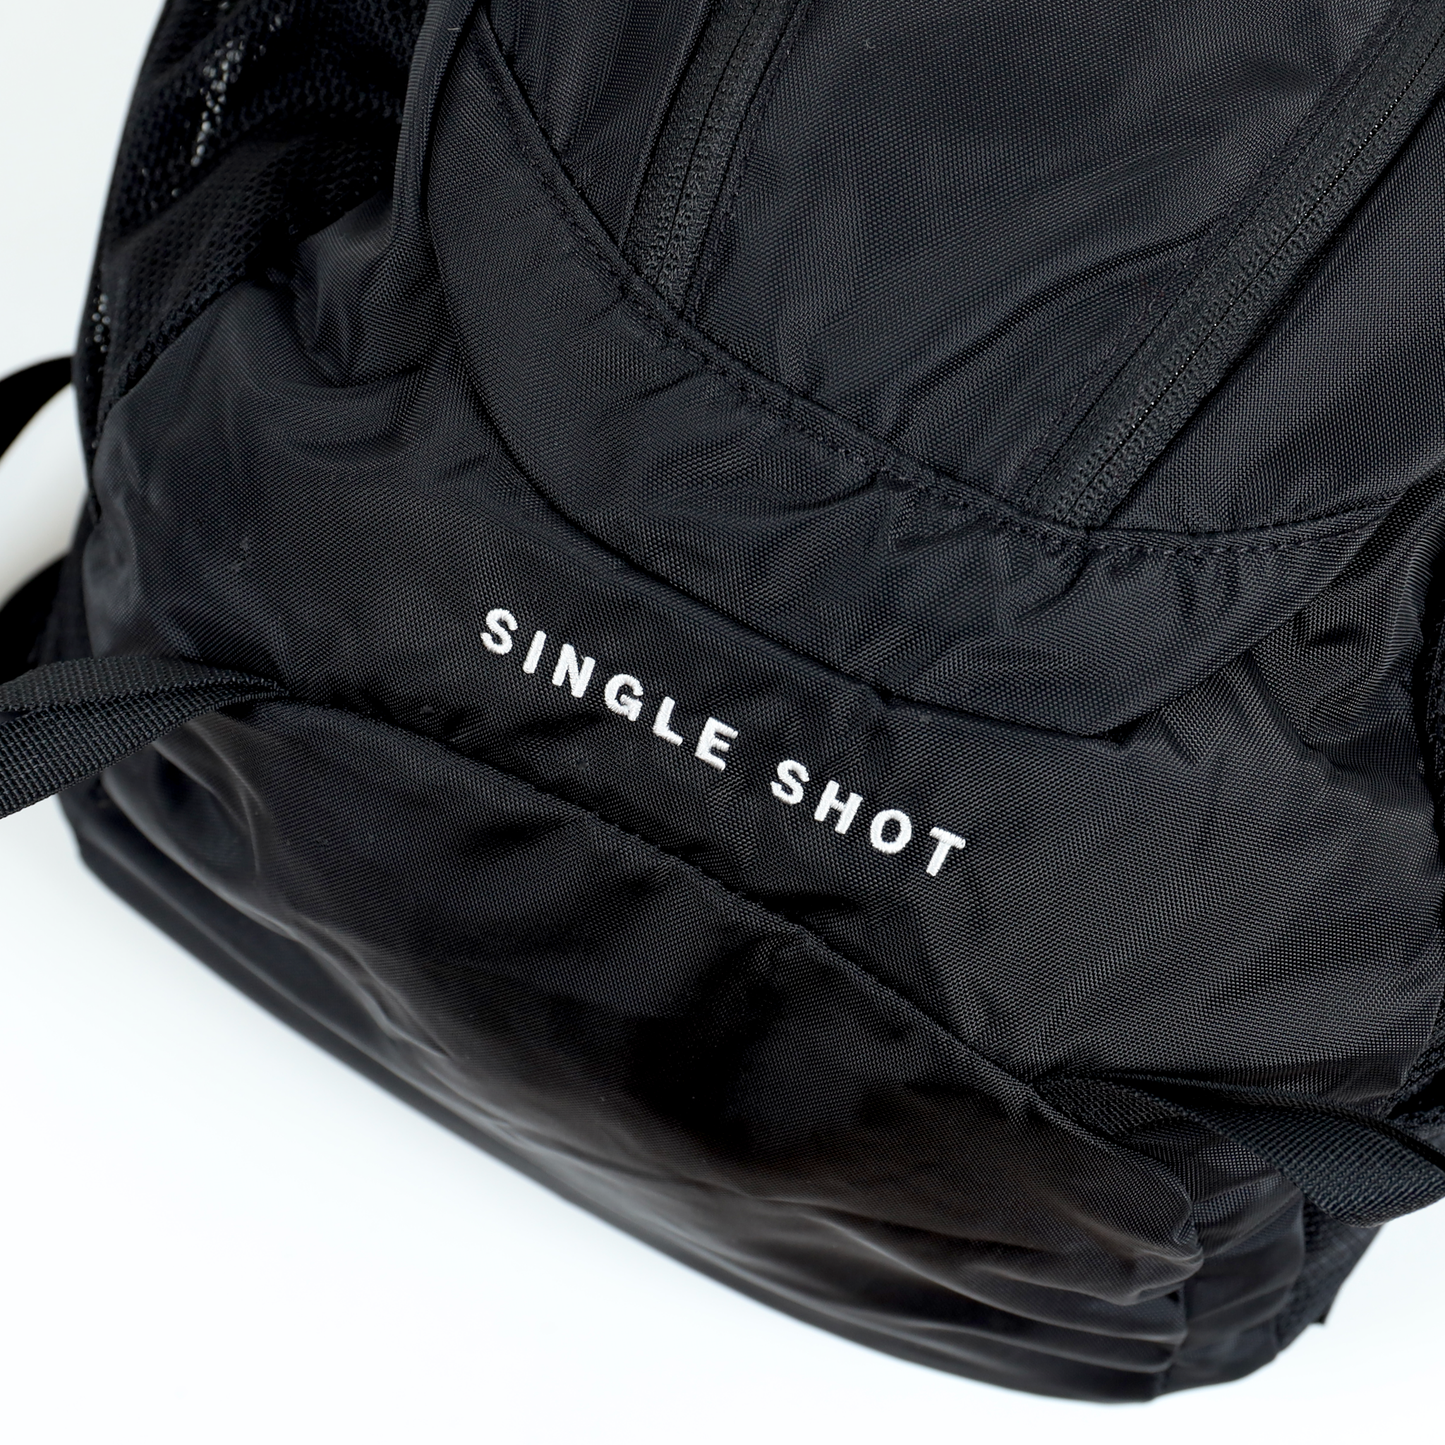 【THE NORTH FACE】Single Shot